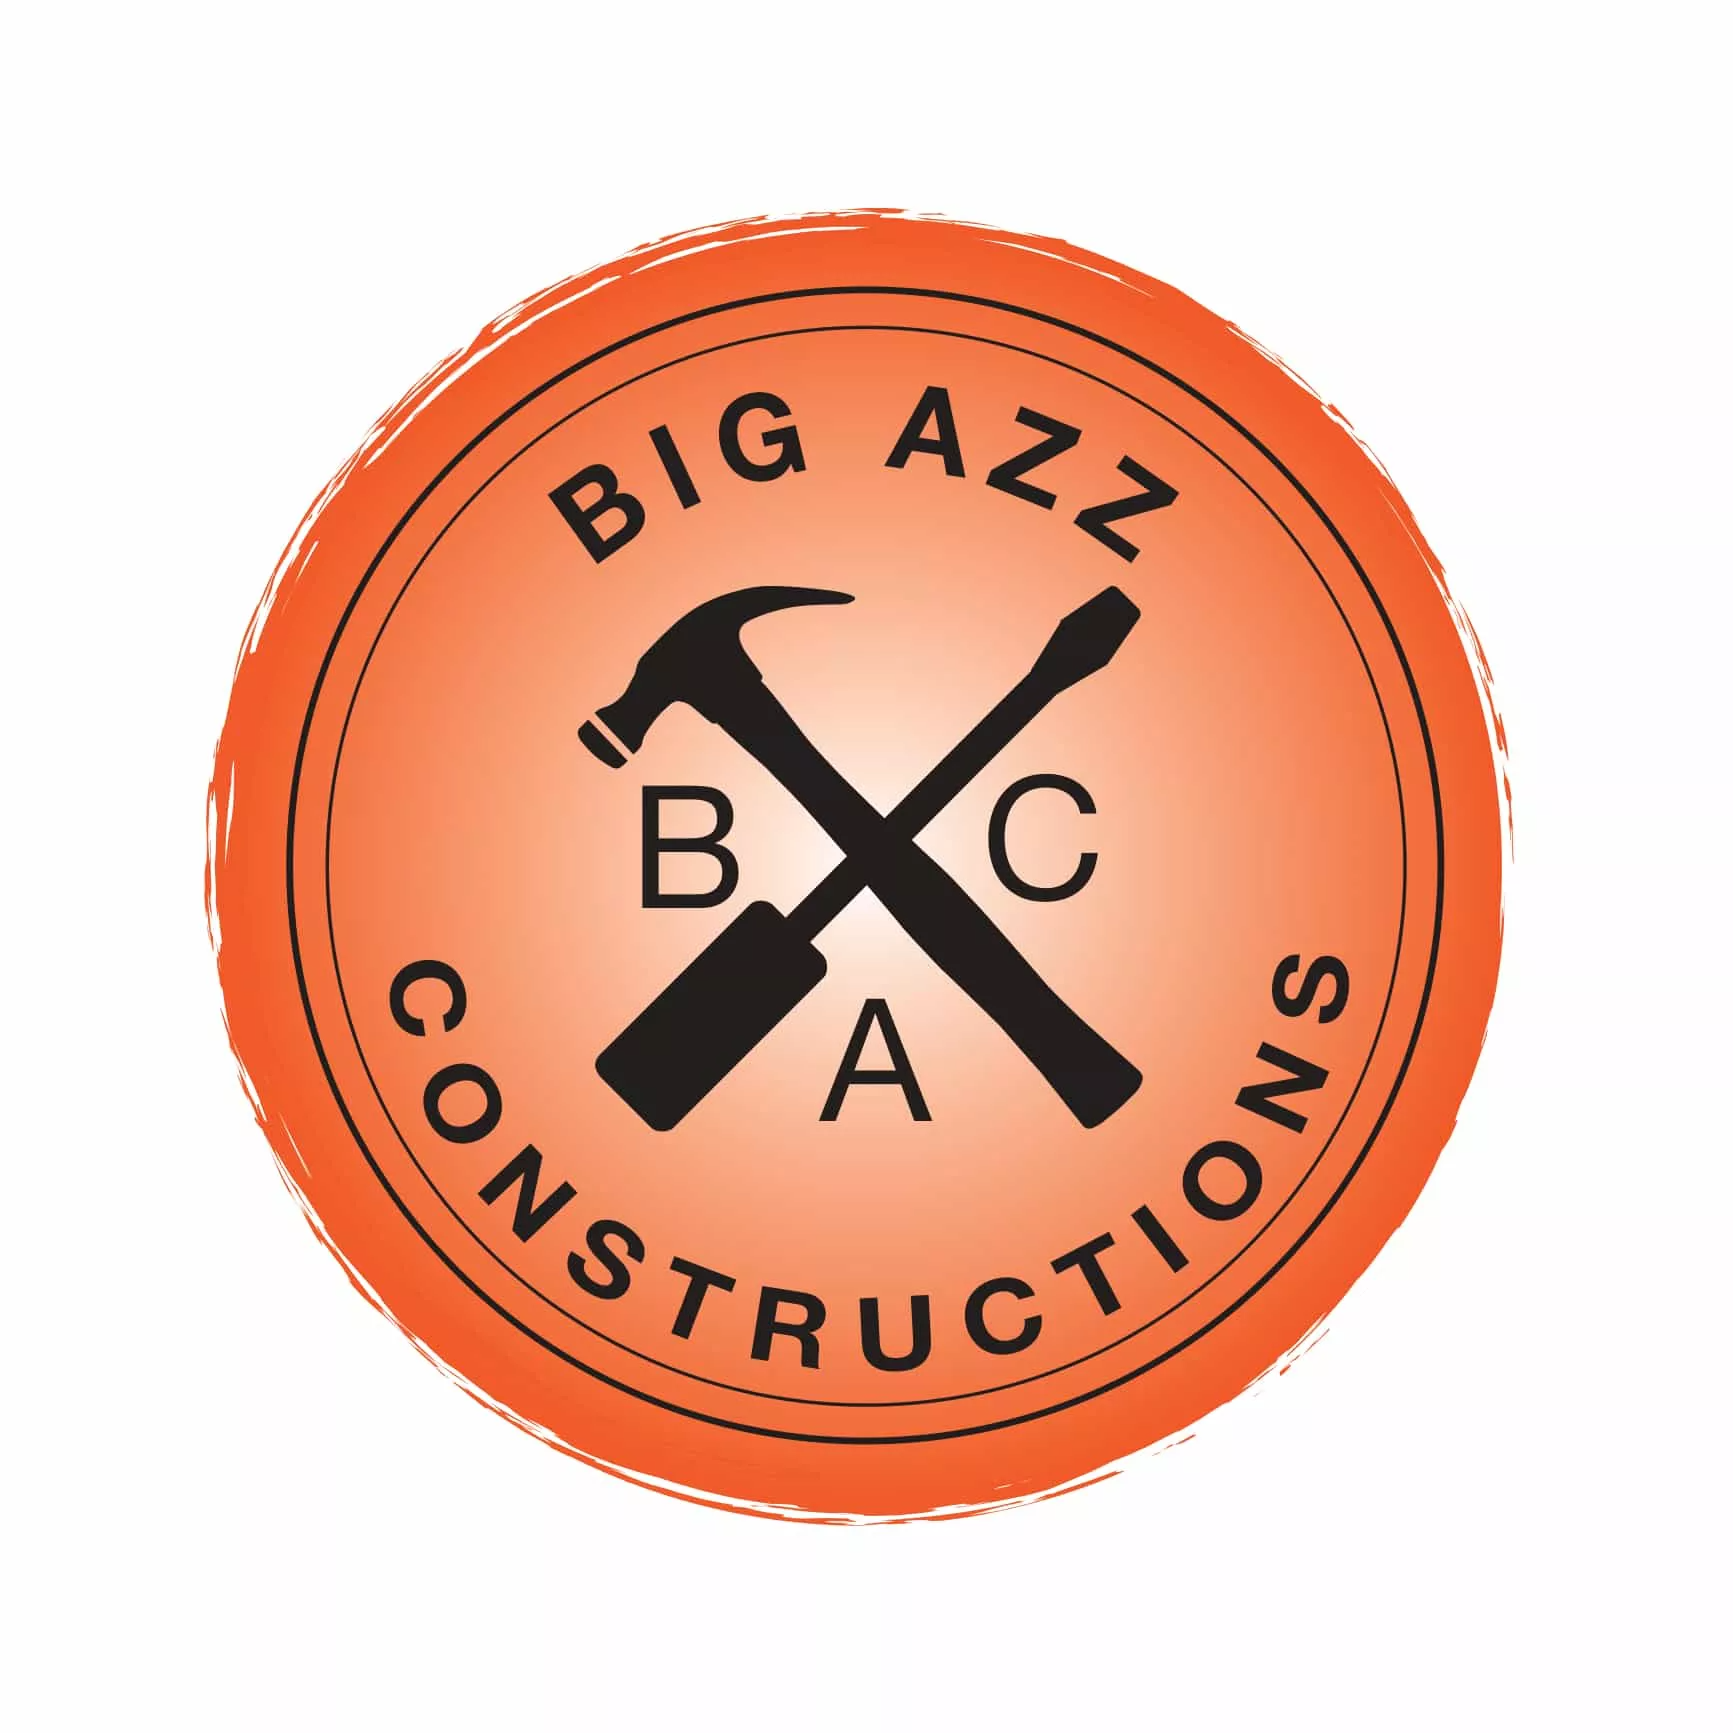 Business logo of Big Azz Constructions